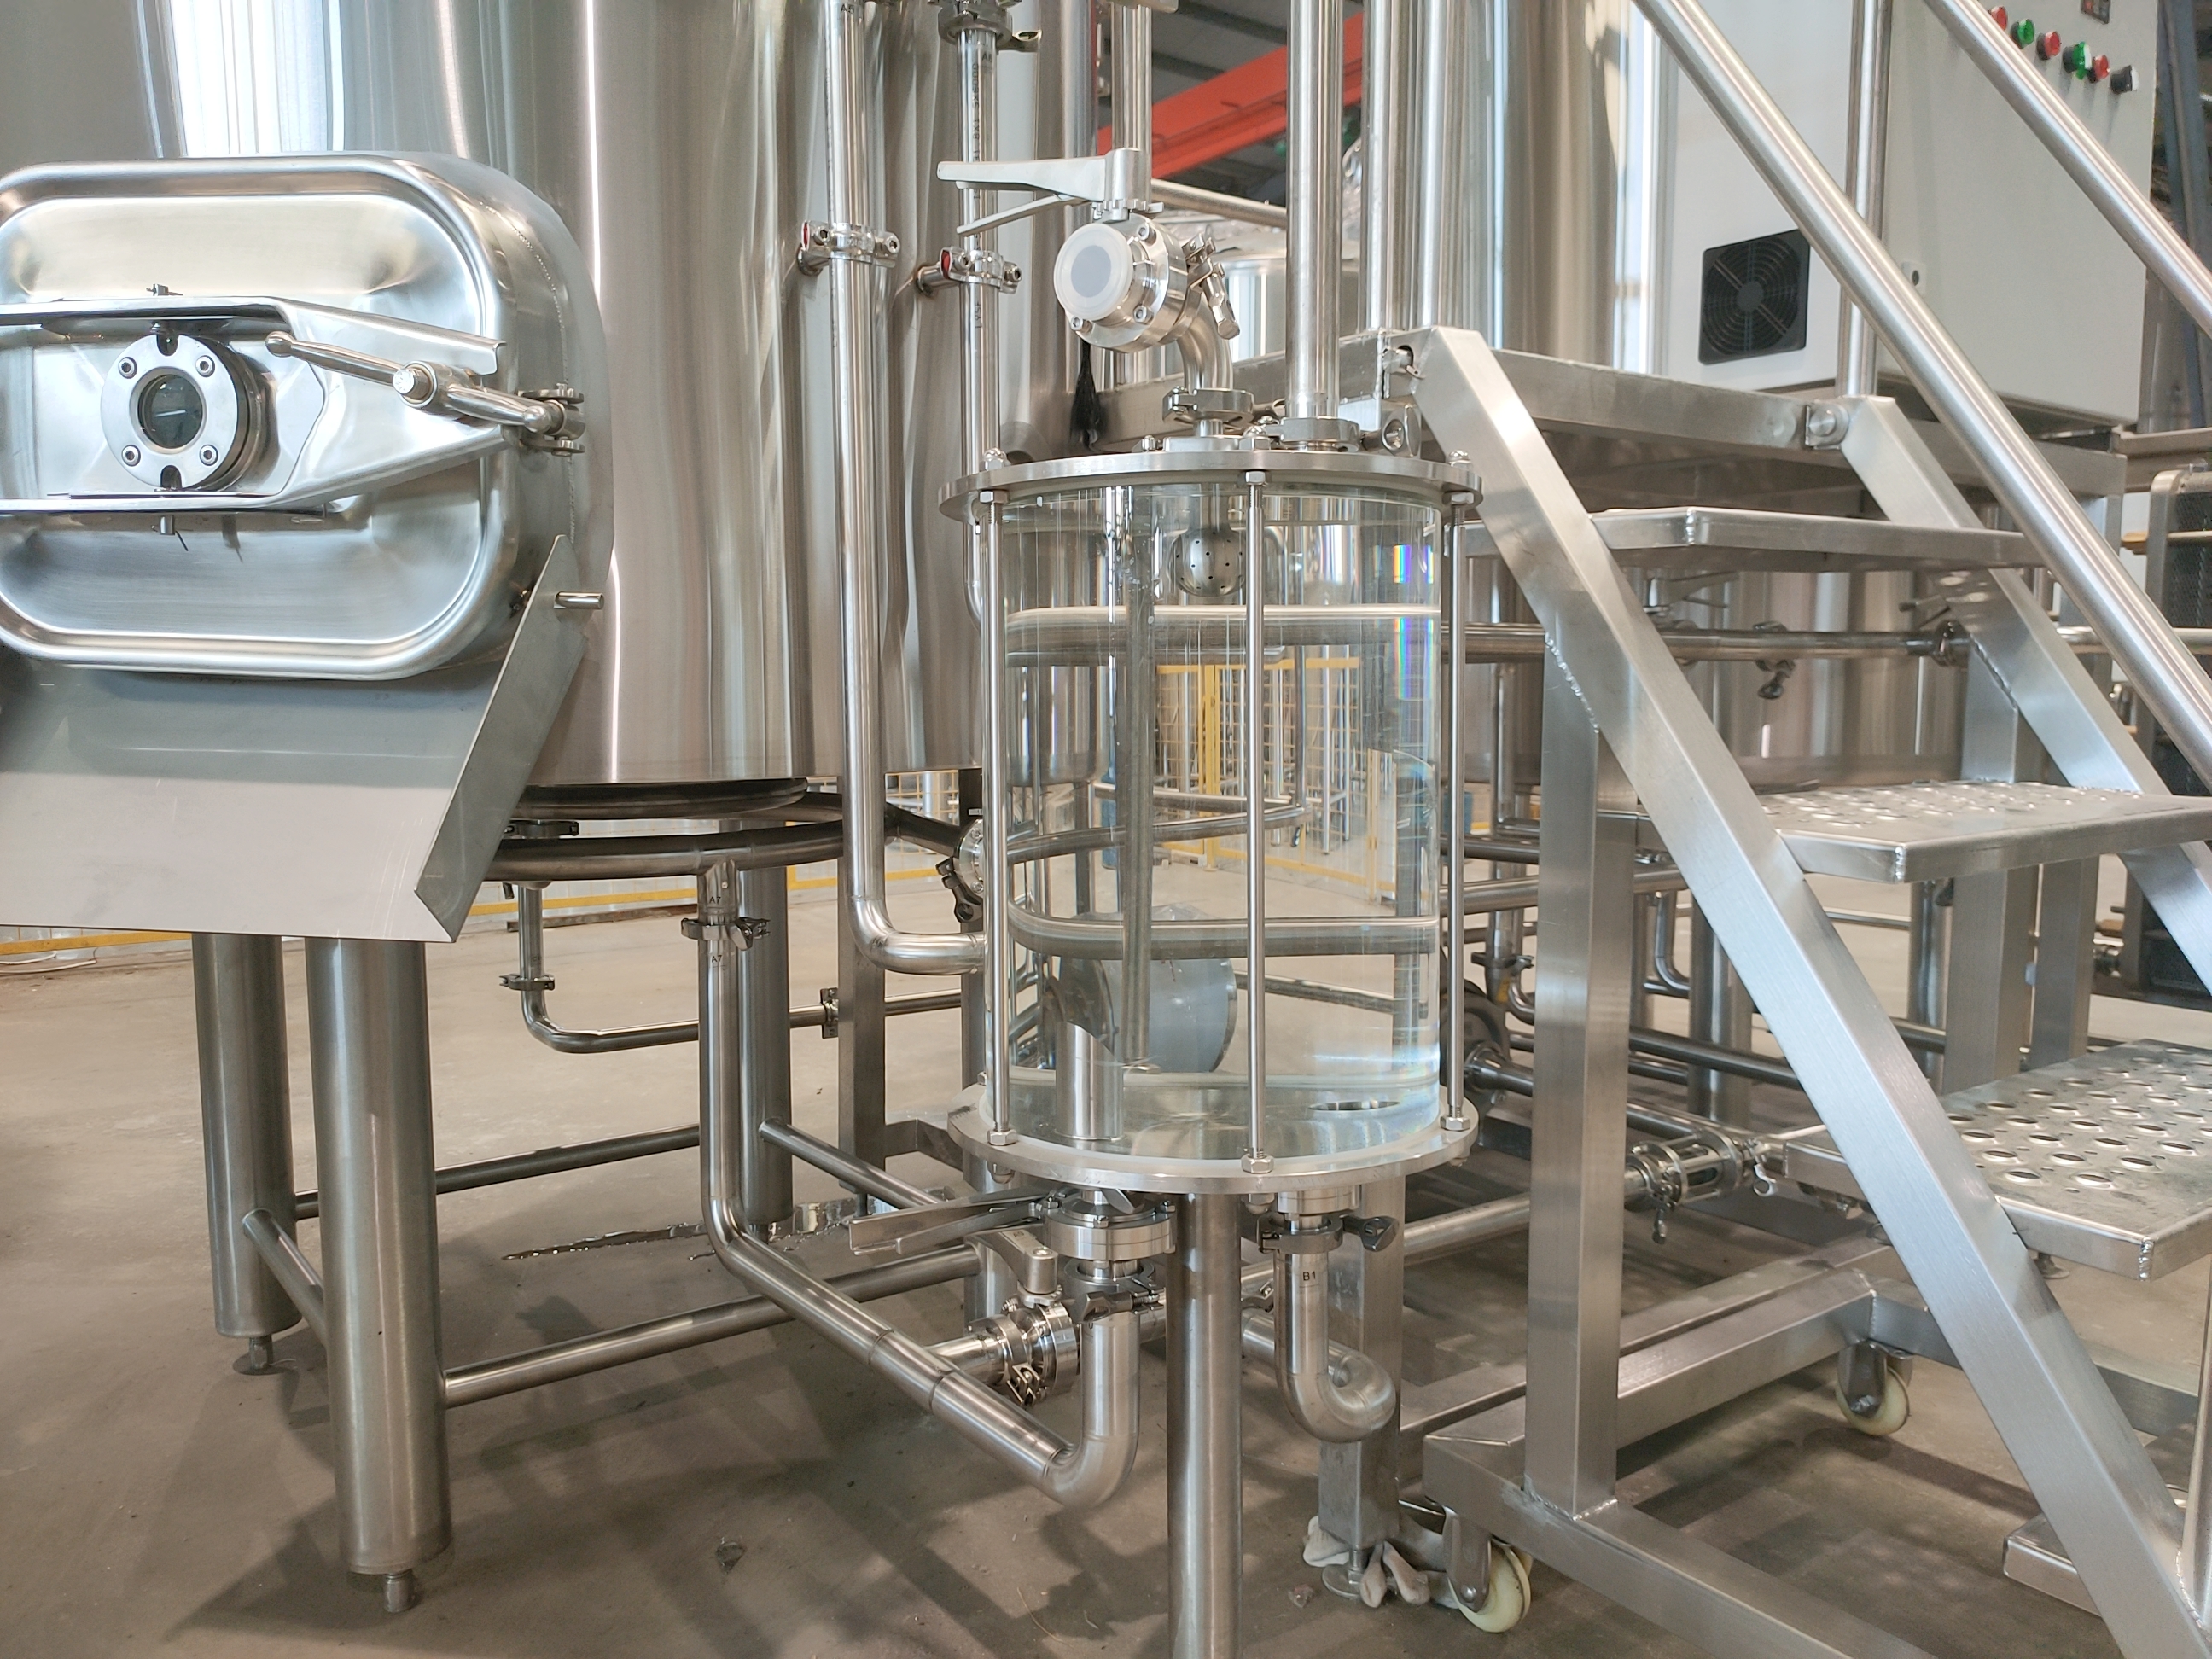 Is a wort grant required for brewery equipment in a craft brewery?